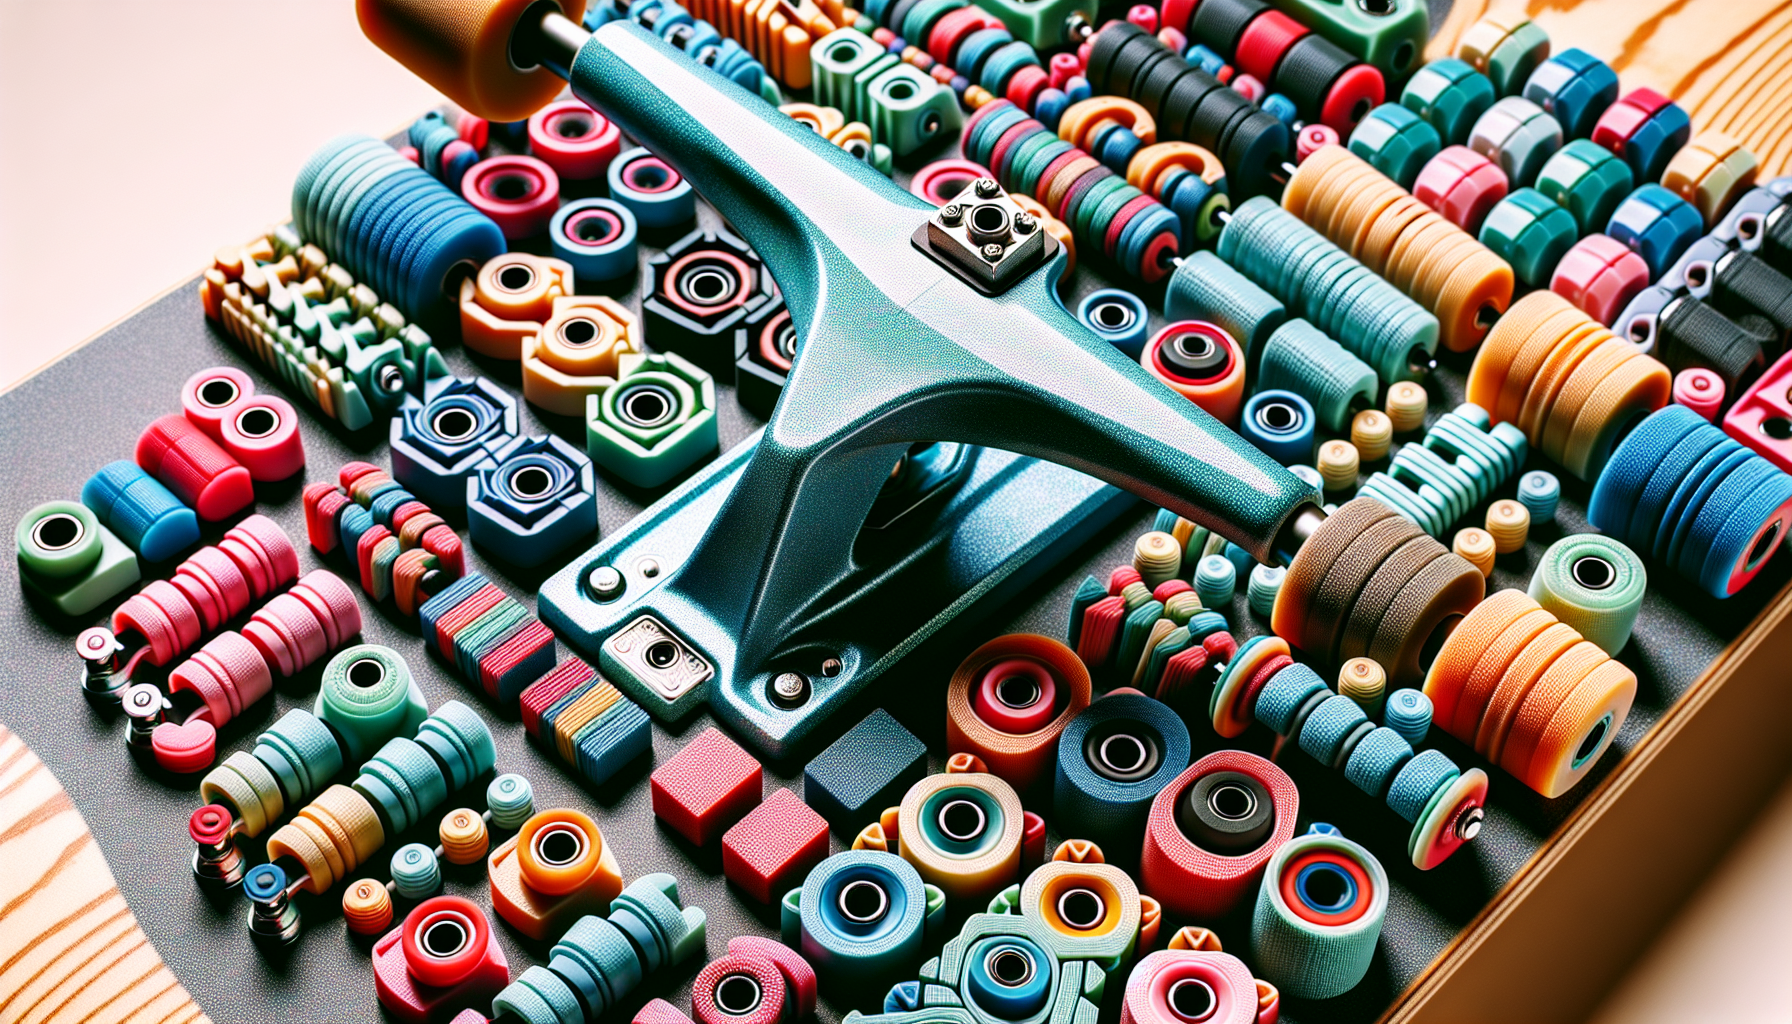 How Do You Customize Skateboard Trucks With Various Bushing Options?